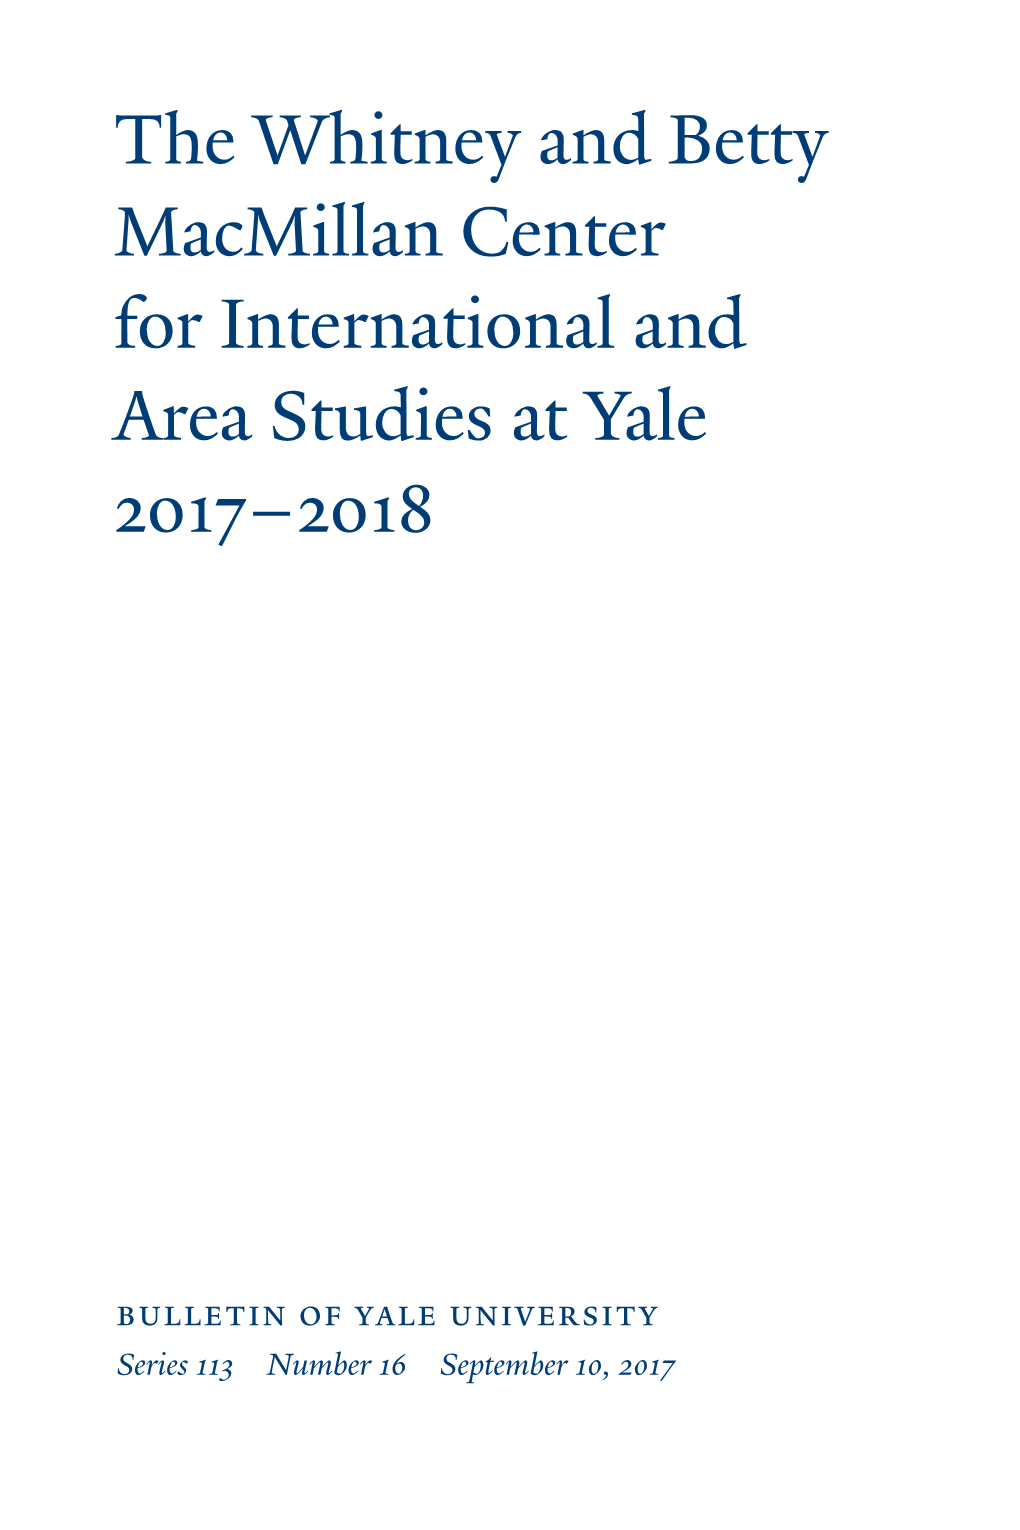 The Whitney and Betty Macmillan Center for Inter- National and Area Studies at Yale, Please Call 203.432.3410, Or Visit